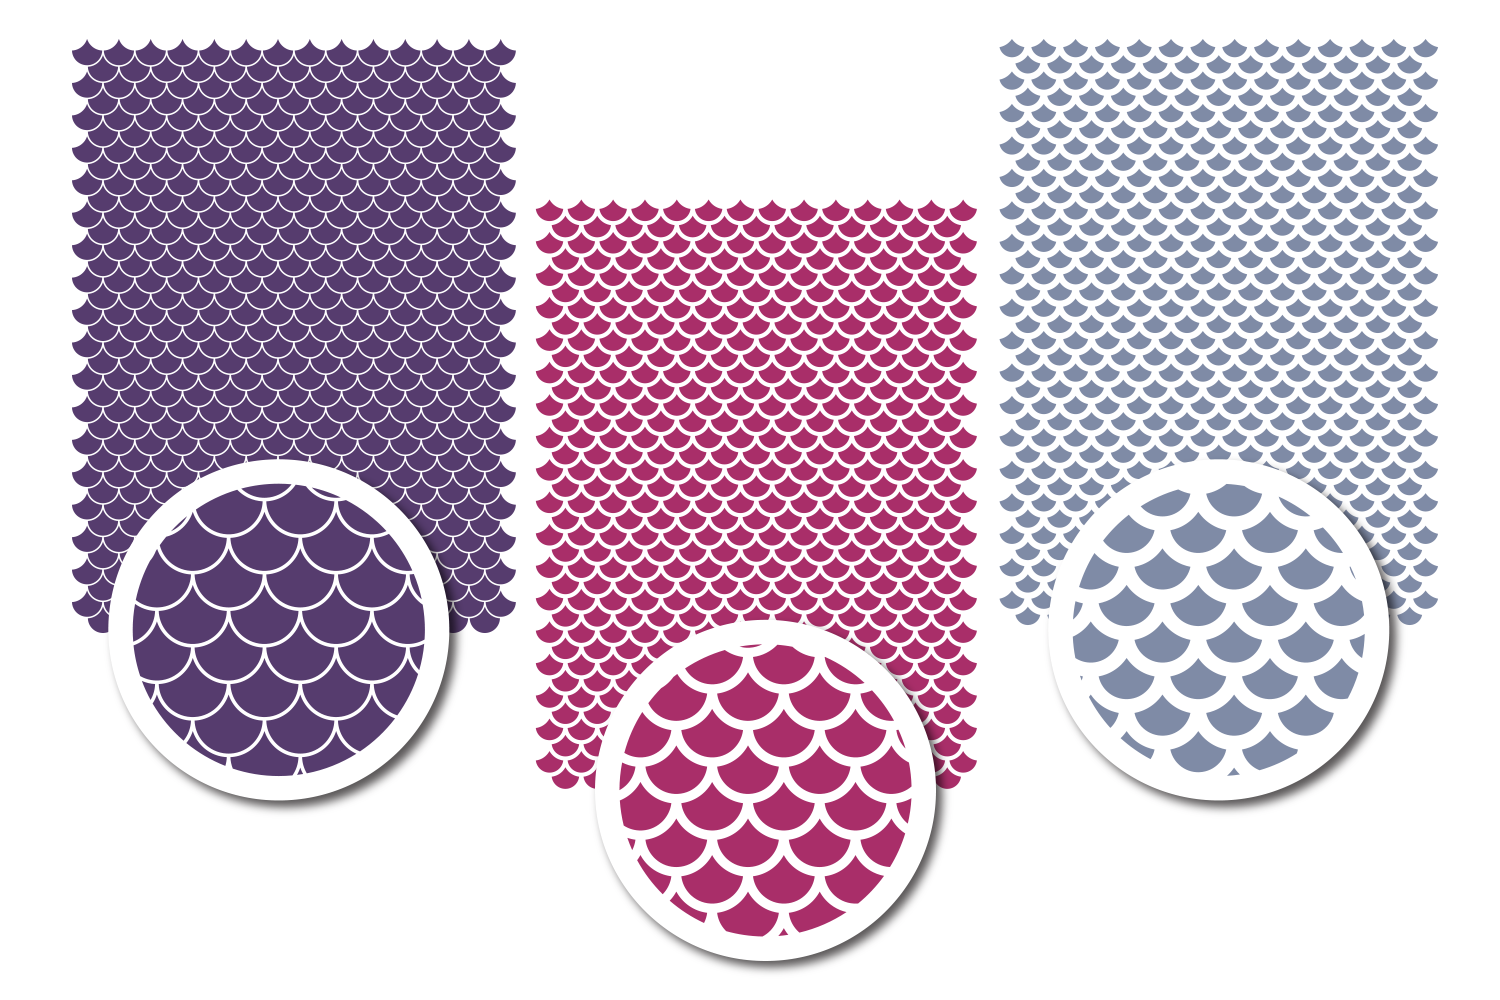 Download Mermaid Scales SVG Fish Scales in SVG, DXF, PNG, EPS